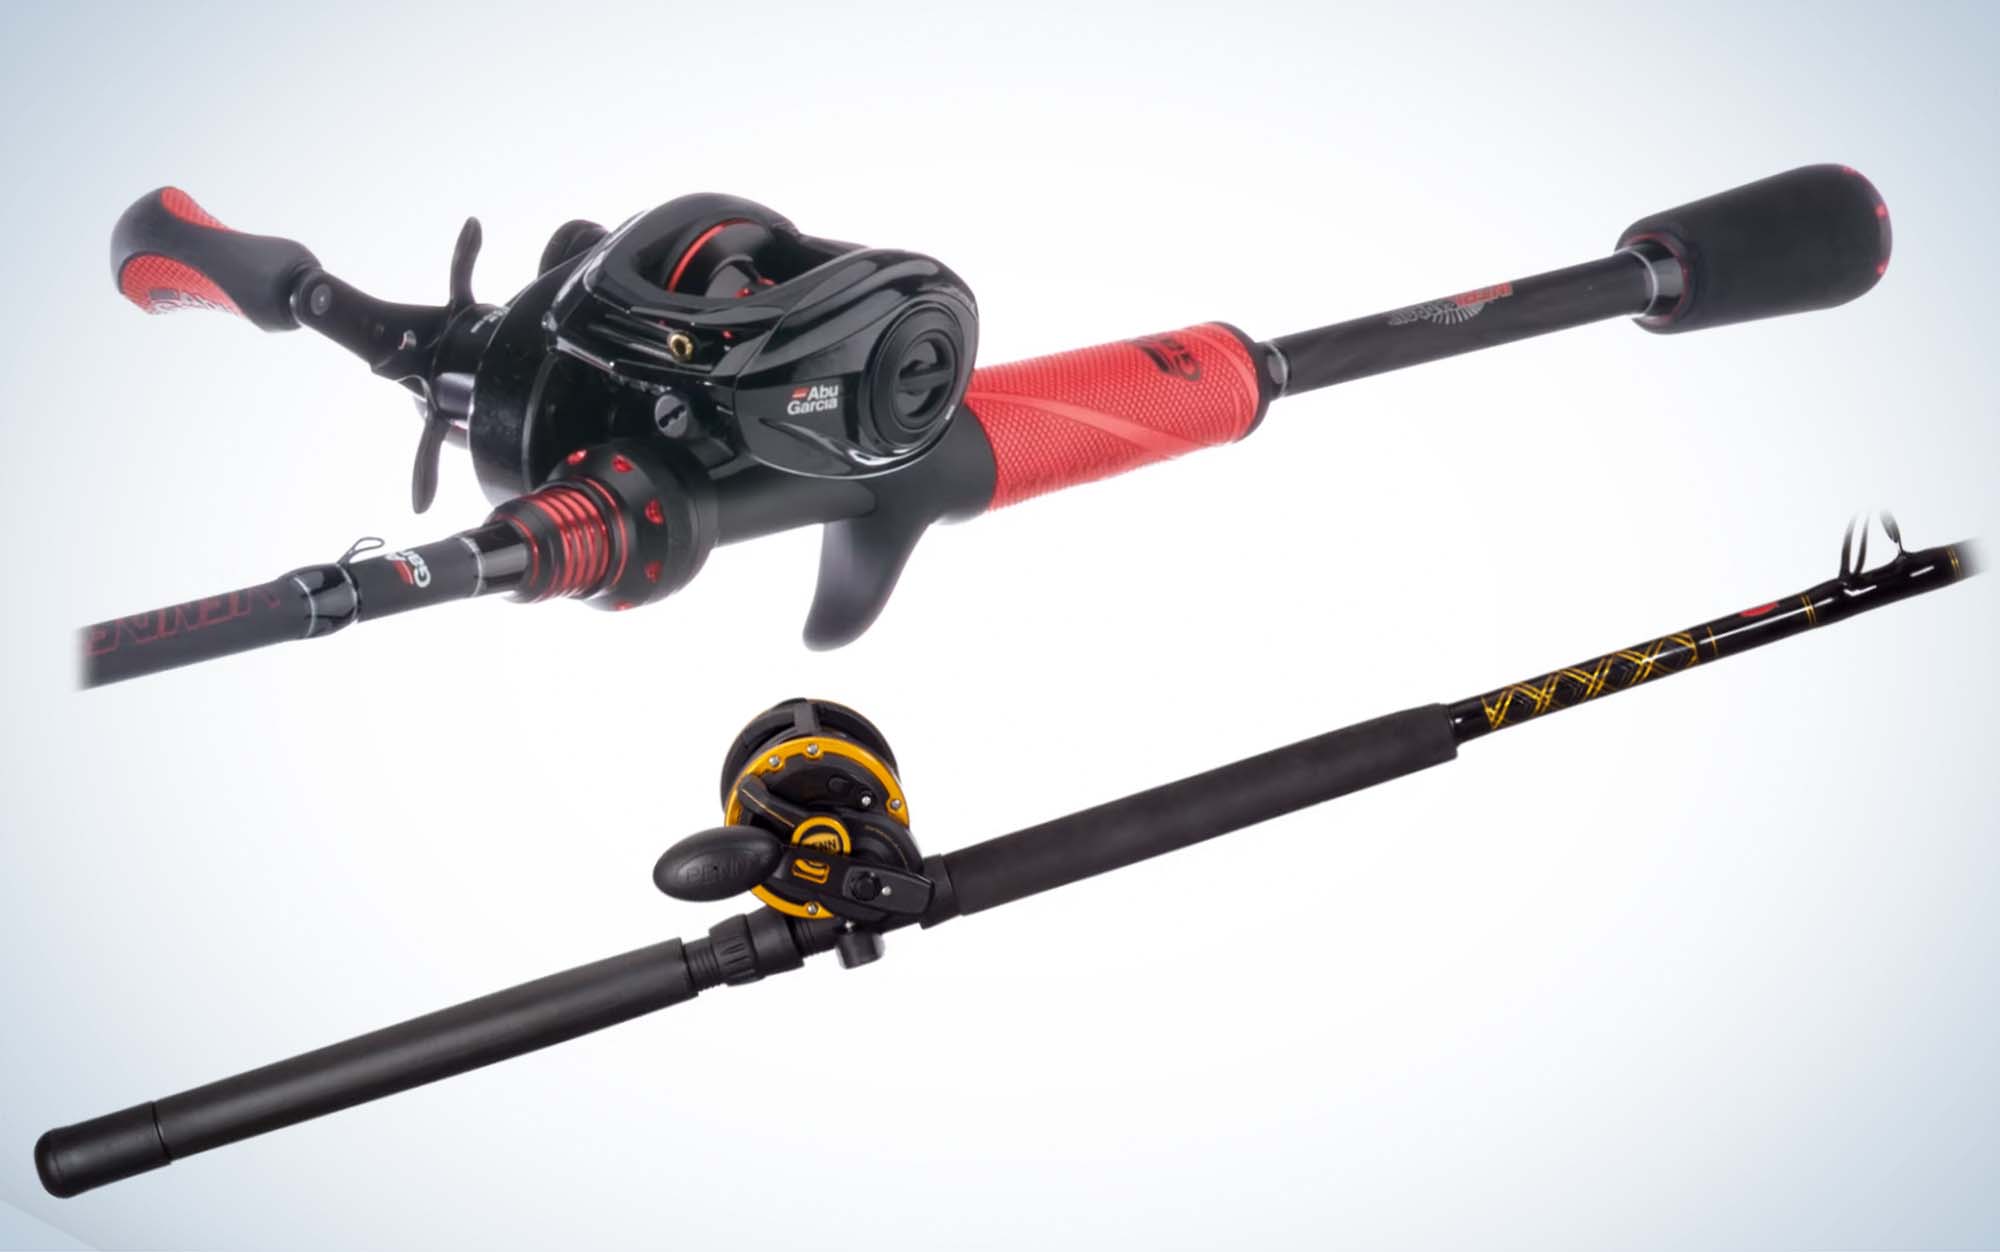 Save $90 to $100 on Rod and Reel Combos from Abu Garcia and Penn